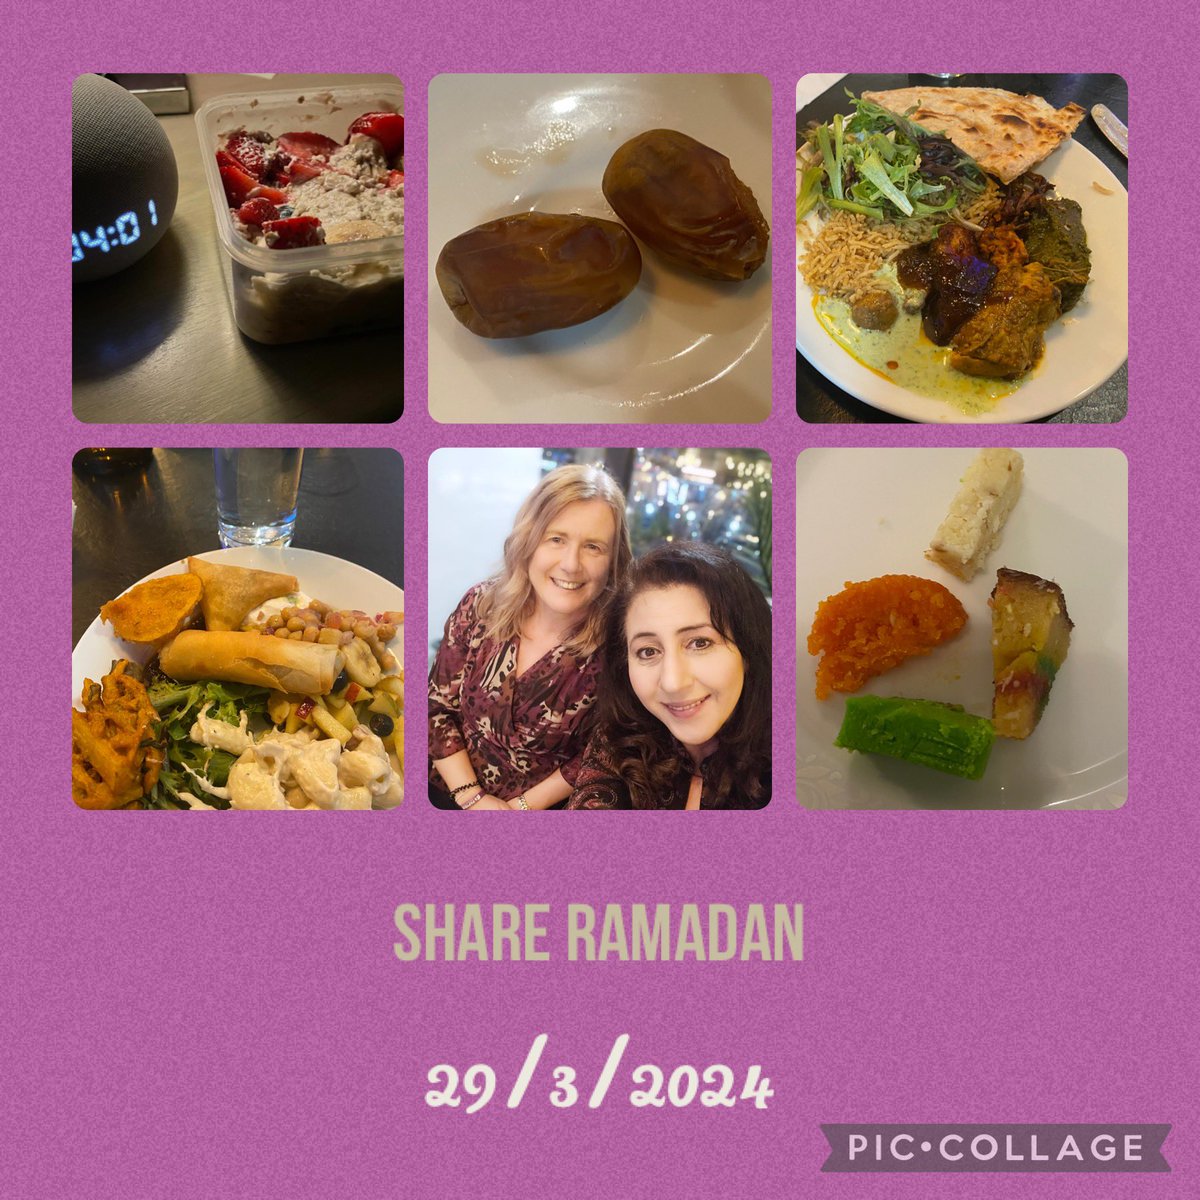 I’m always full of admiration for how my Muslim colleagues and friends fast and work during #Ramadan  Today’s been a real test of my willpower especially not having any water with a bad cough 😂 It was lovely to open #Iftaar2024 with you and appreciate water, food & friendship 🙏